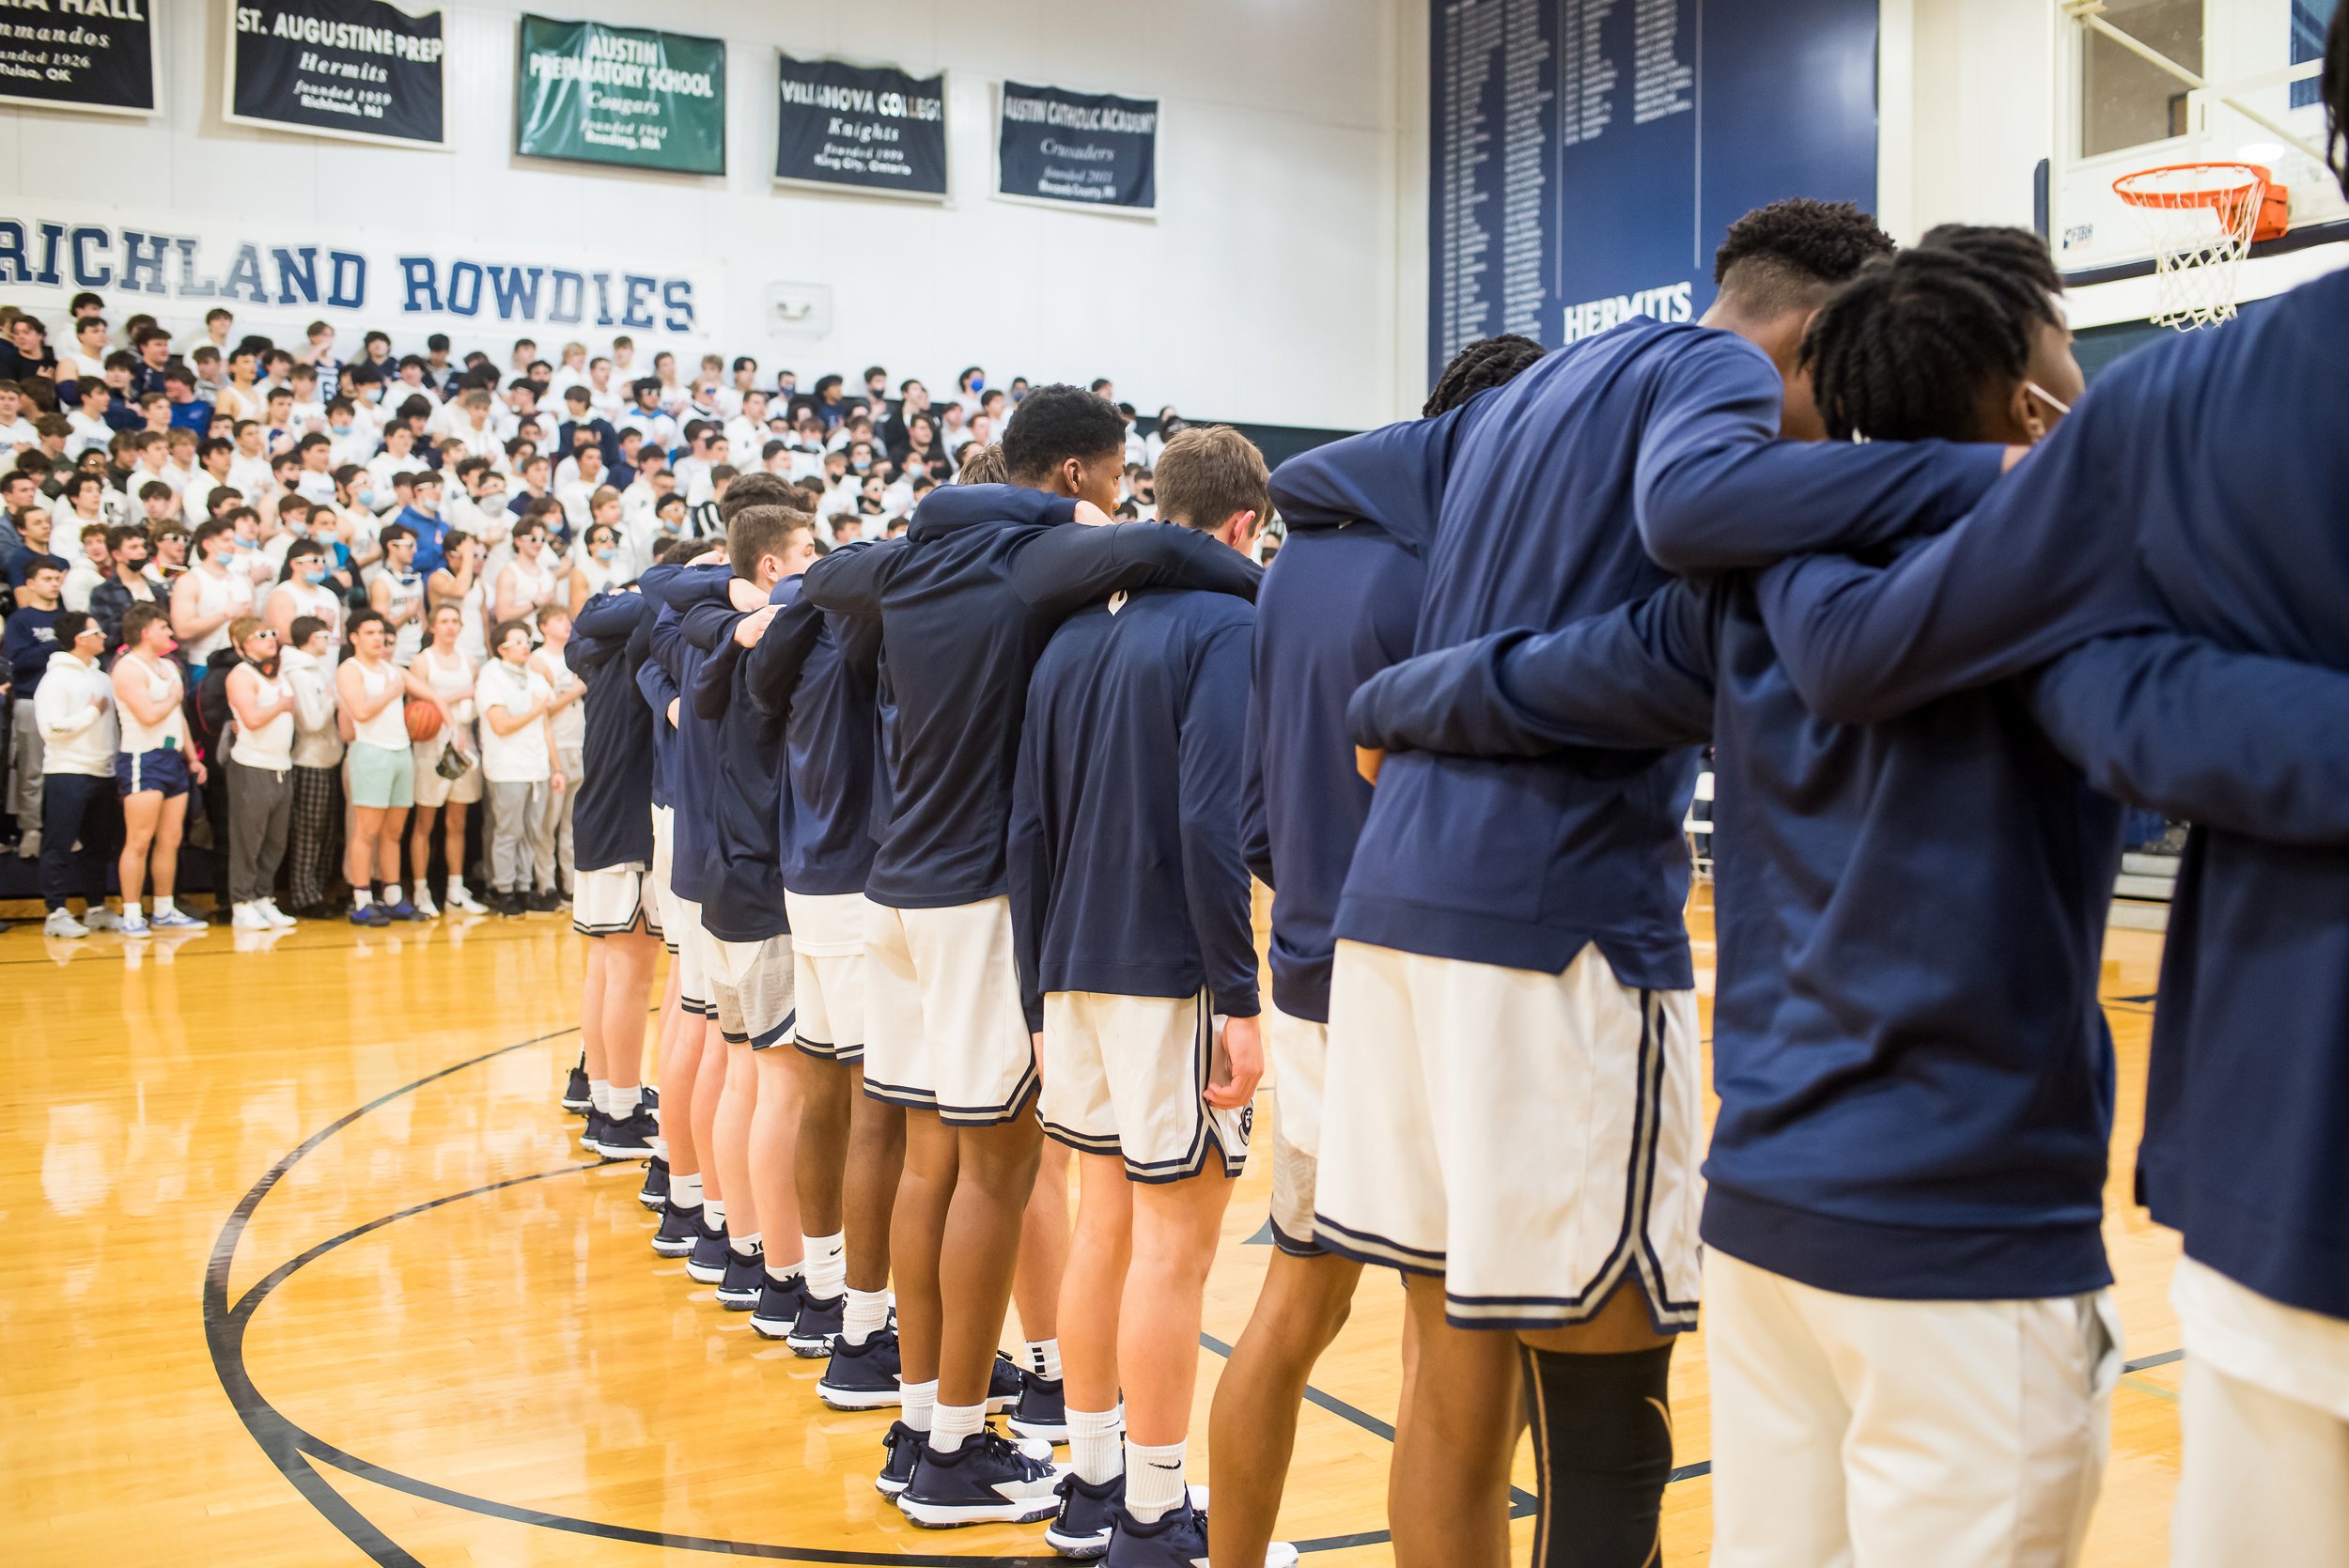 Hermits Basketball team lines up in front of crowd in the school gymnasium prior to a game.